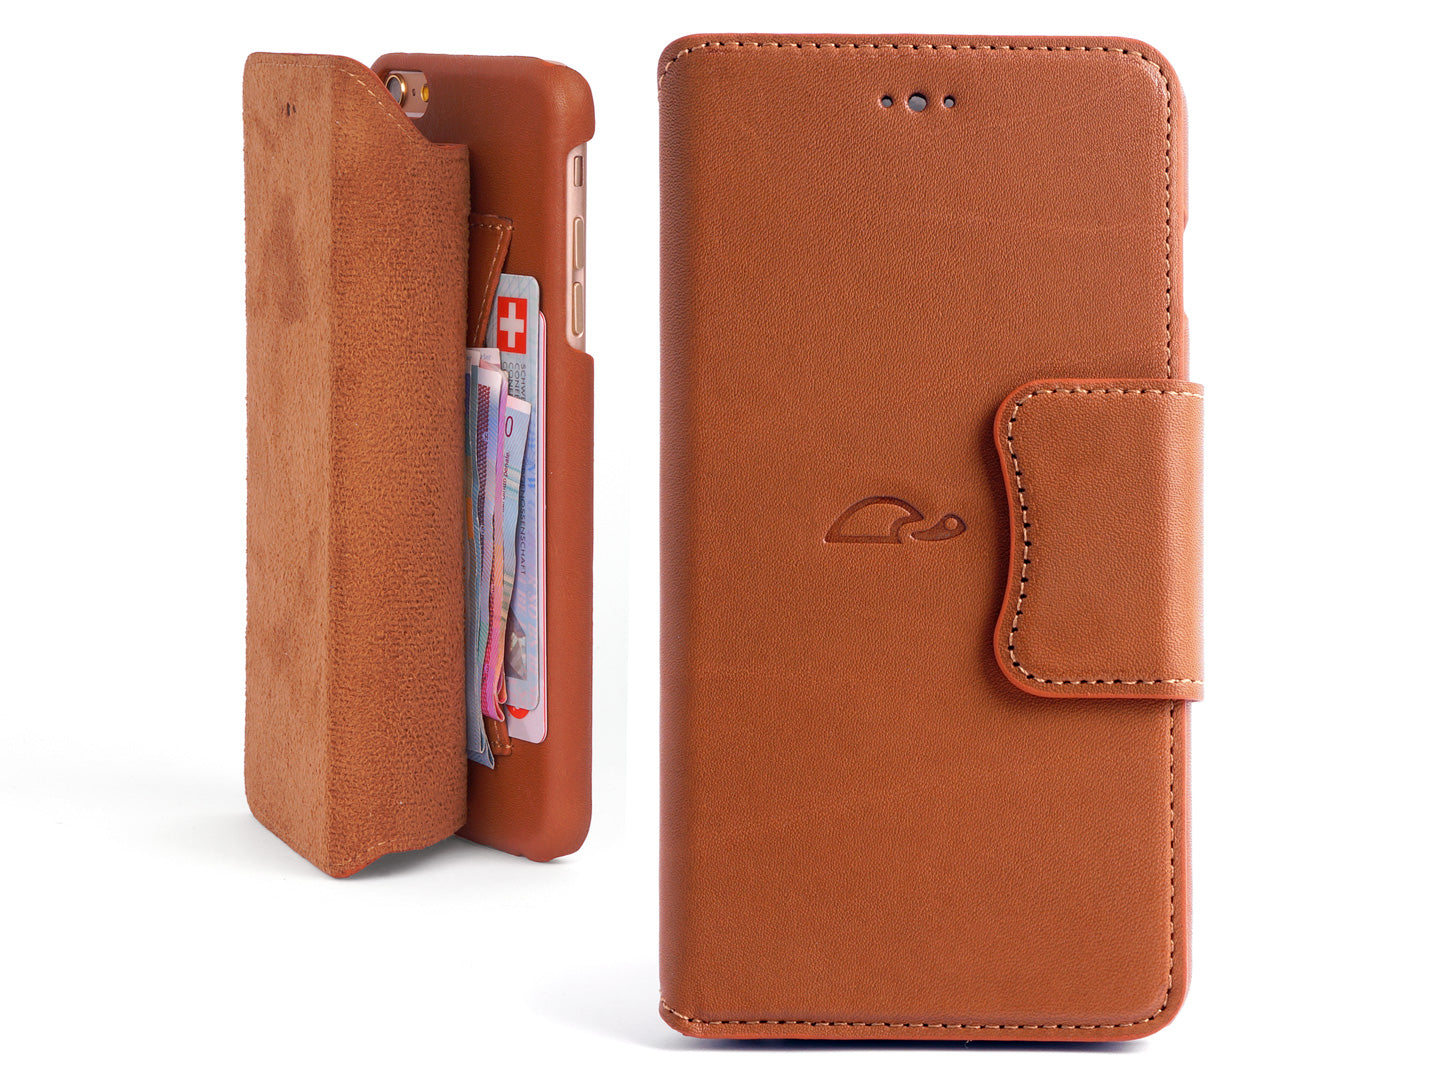 iPhone 6 / 6 Plus Leather Wallet Case with Cards & Cash